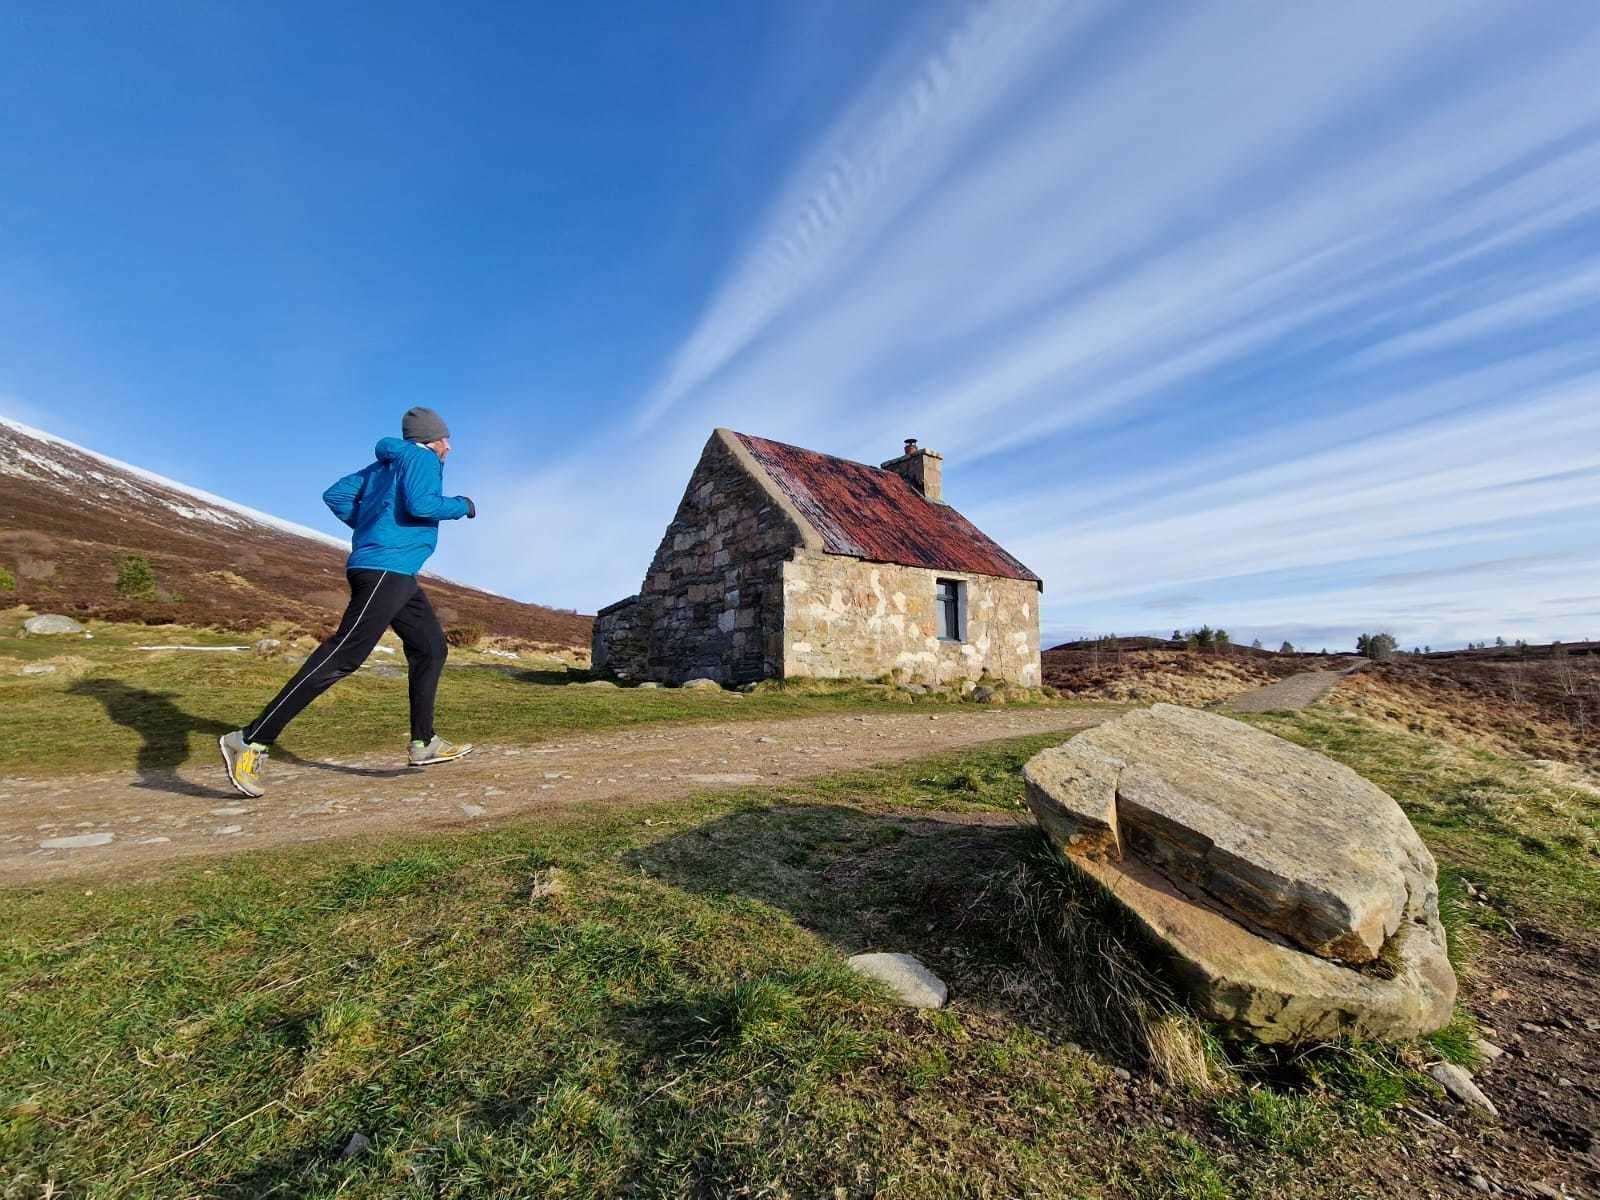 John strides past Ryvoan bothy on a run in the Cairngorms National Park.